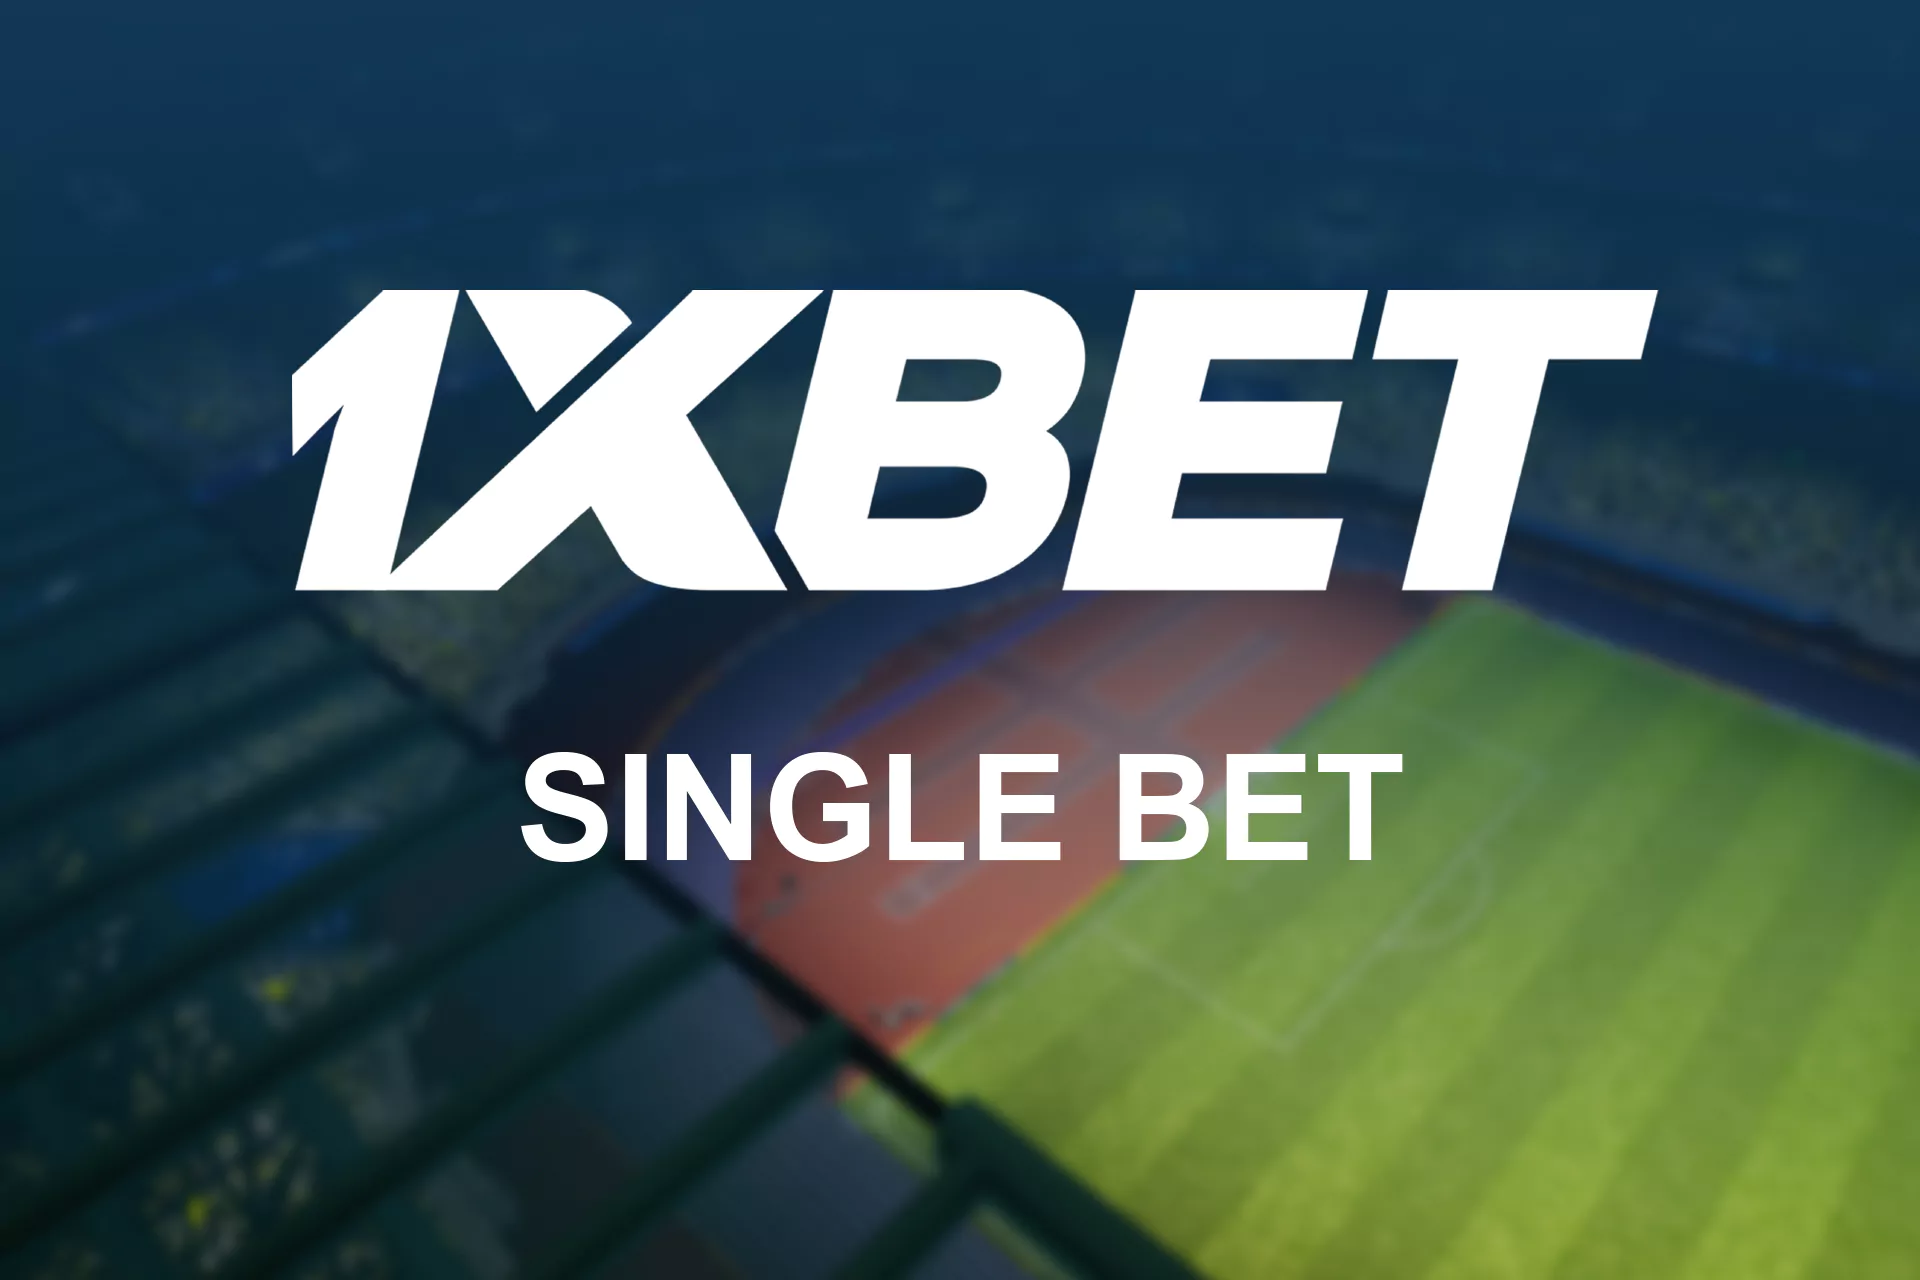 Place a single bet on the official 1xBet website in Bangladesh.